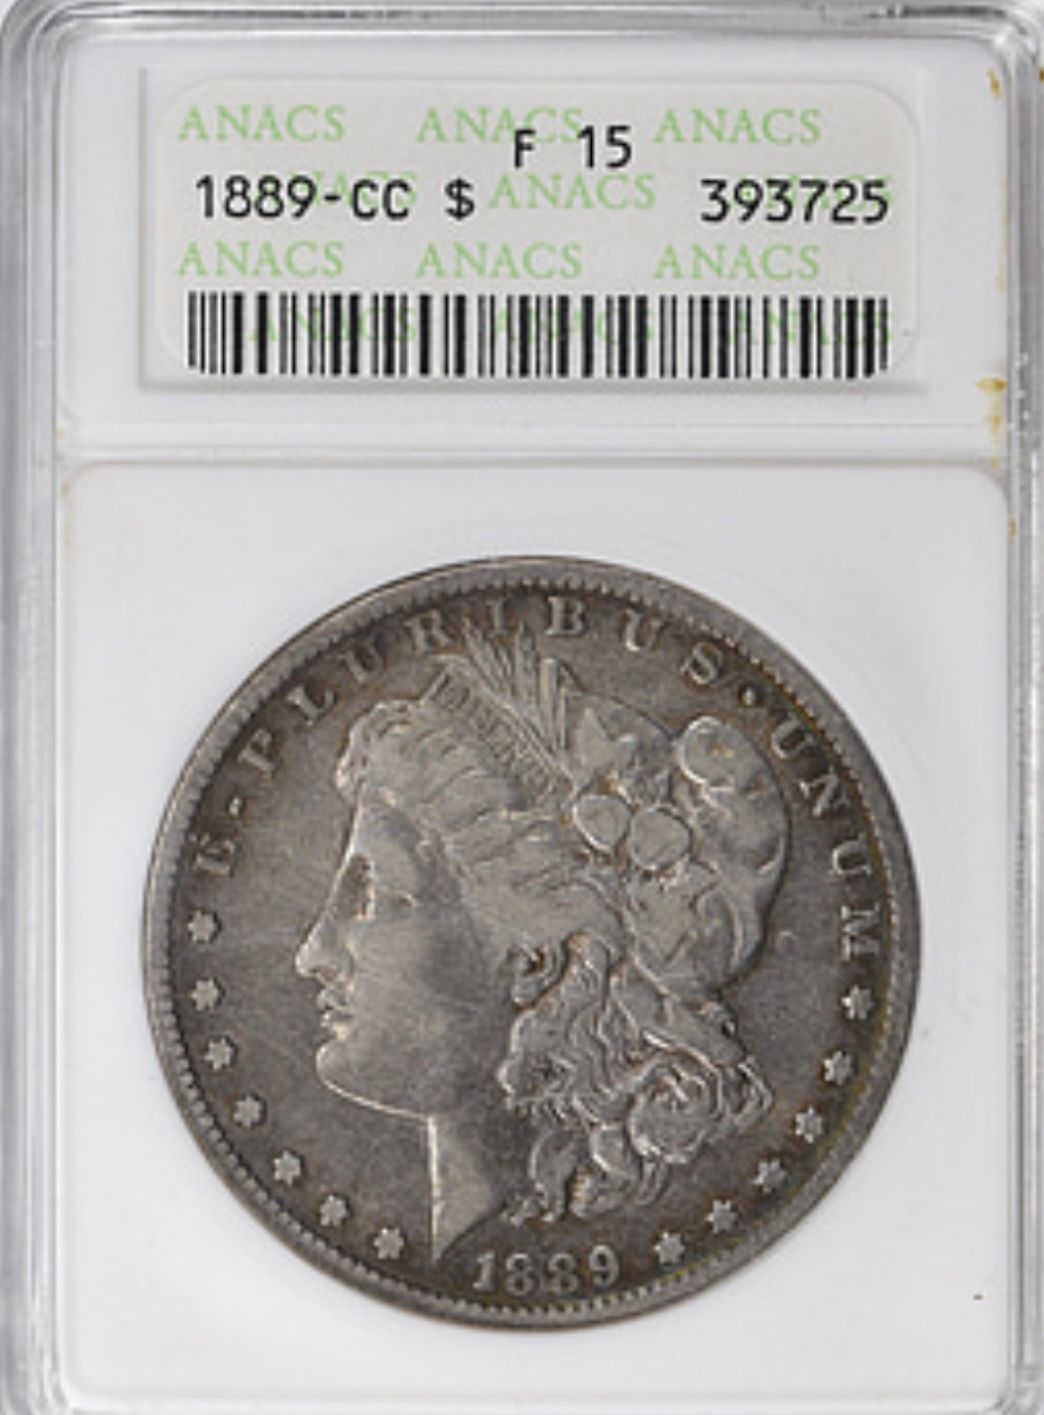 1865 2 Cents